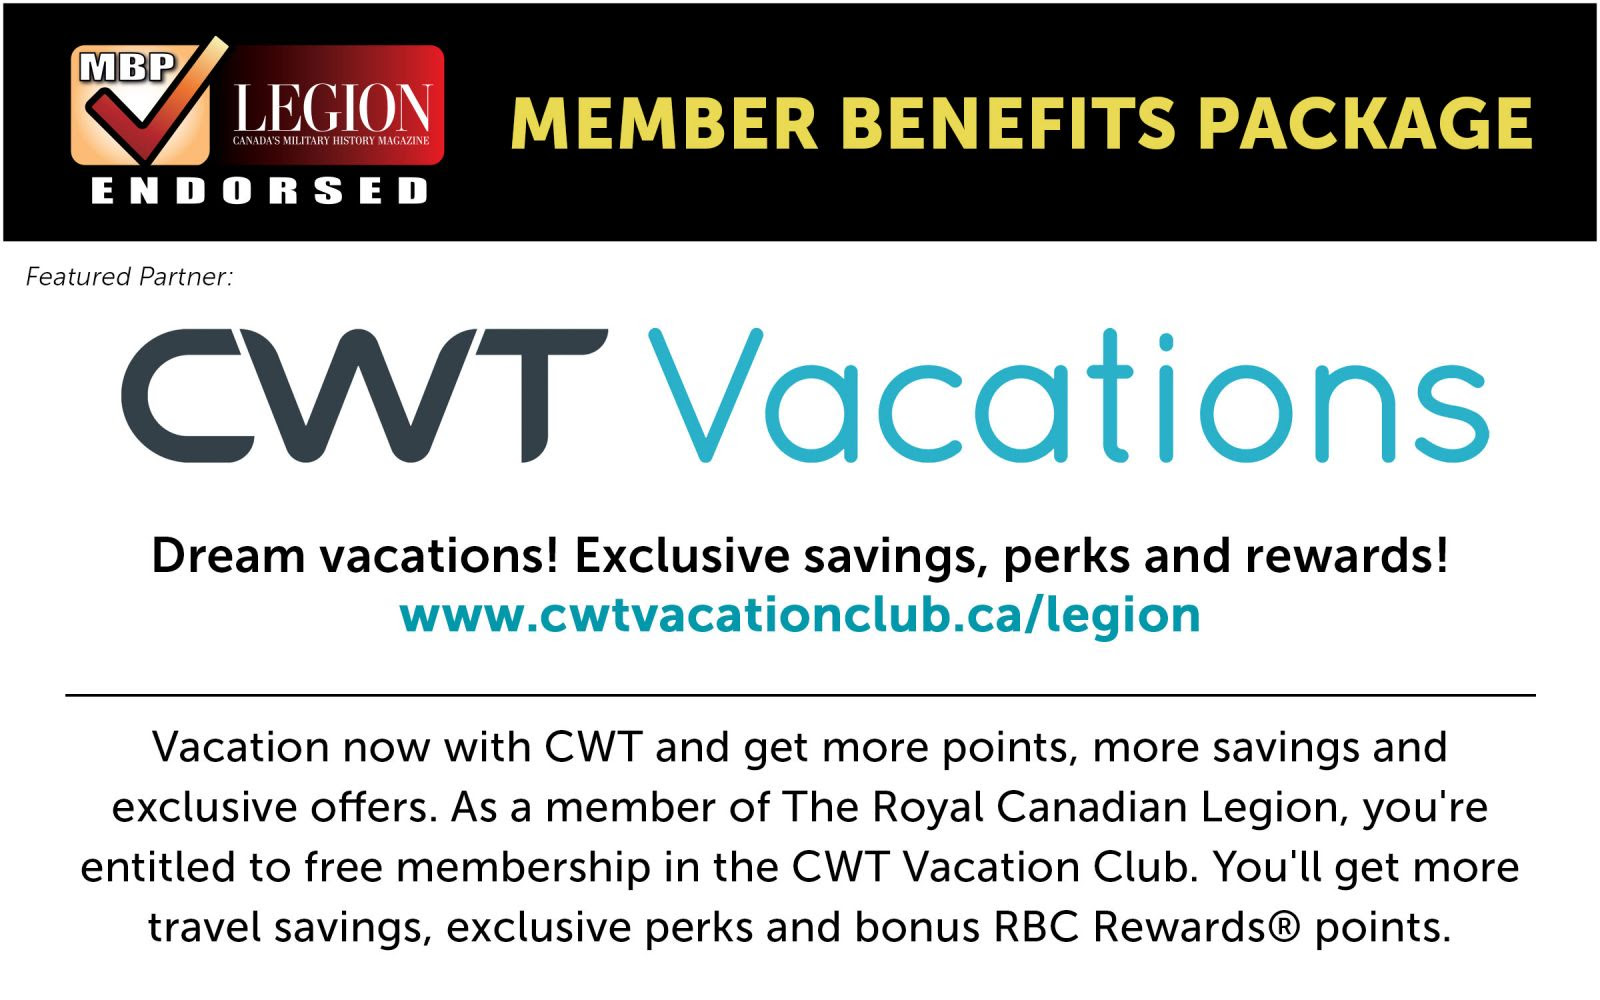 CWT Vacations